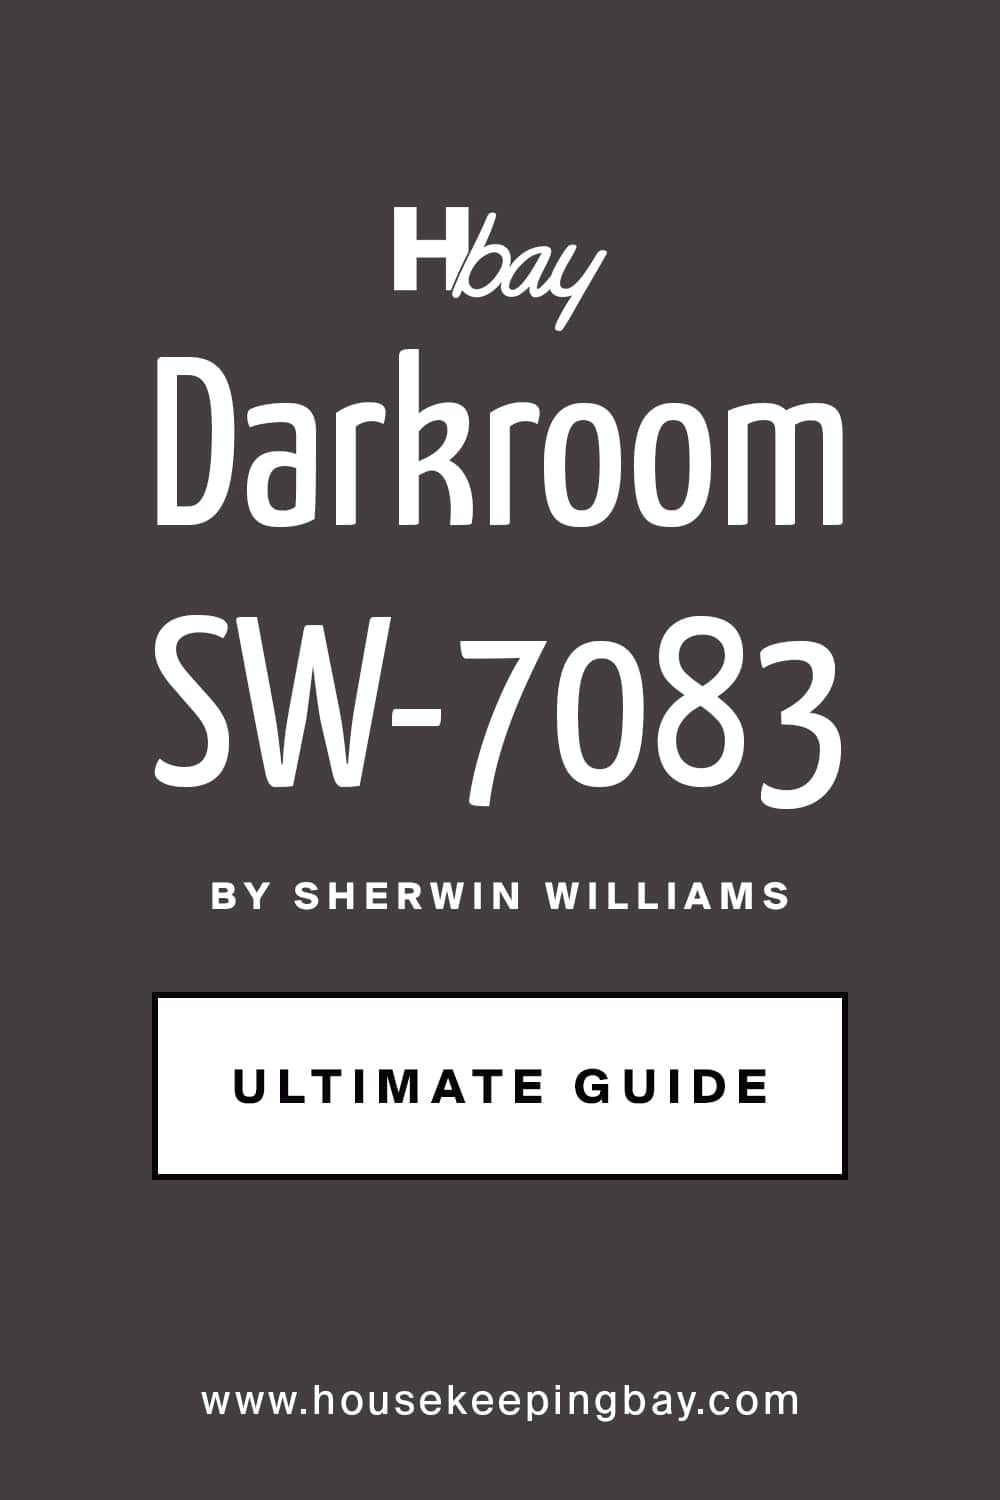 Darkroom SW 7083 Paint Color by Sherwin Williams Ultimate Guide